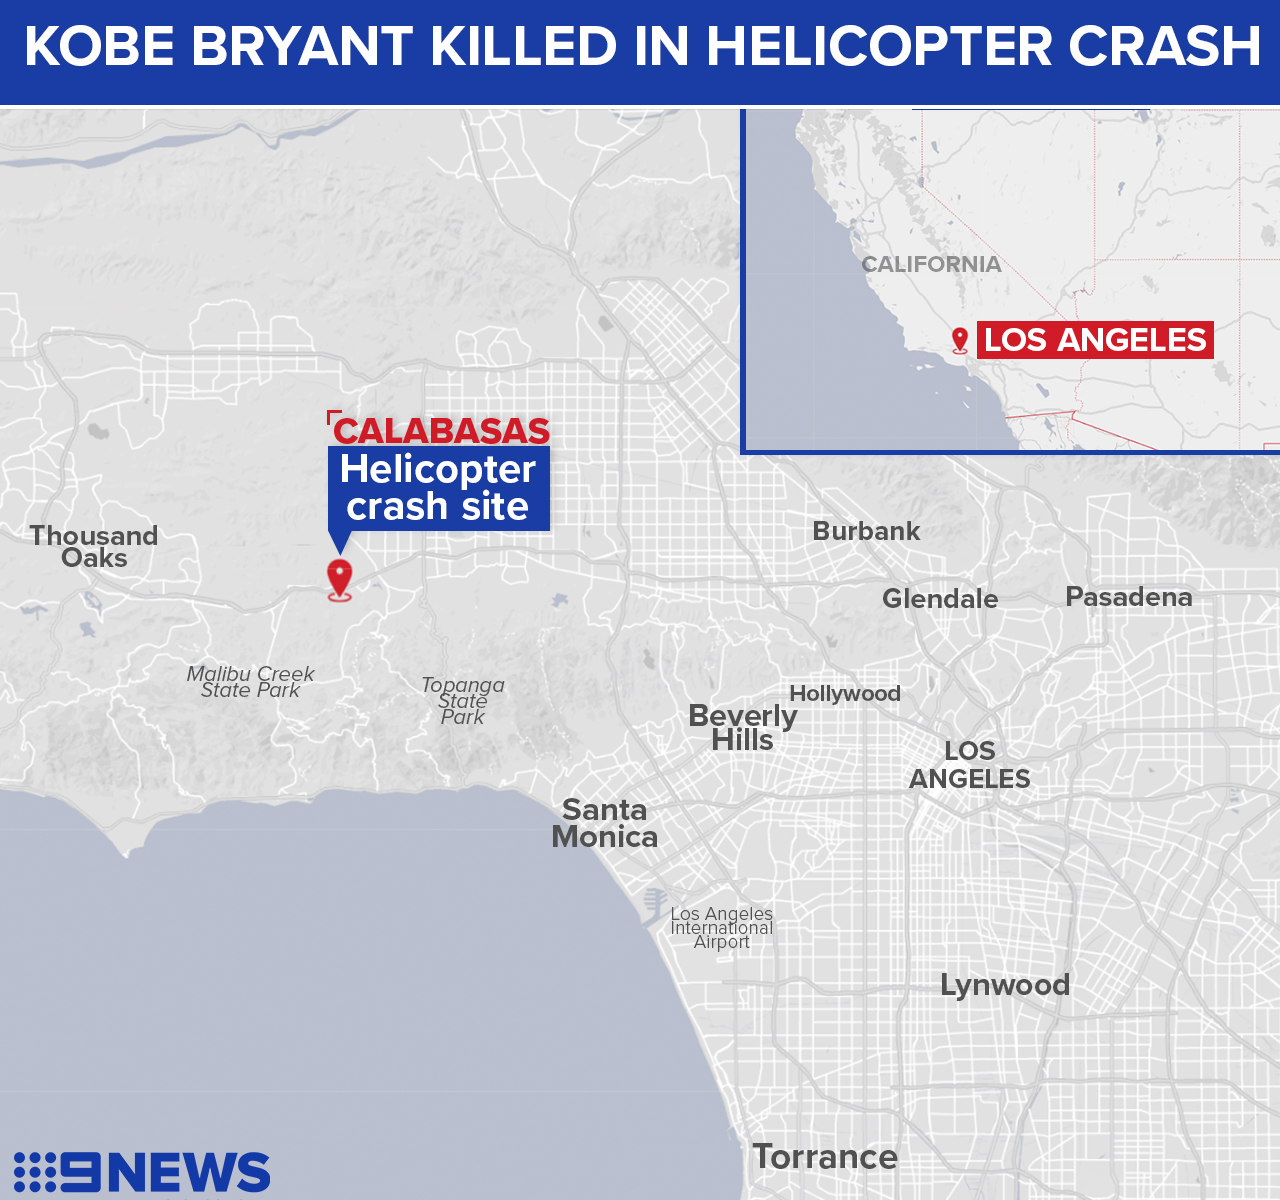 Map showing where Kobe Bryant was killed in a helicopter accident.